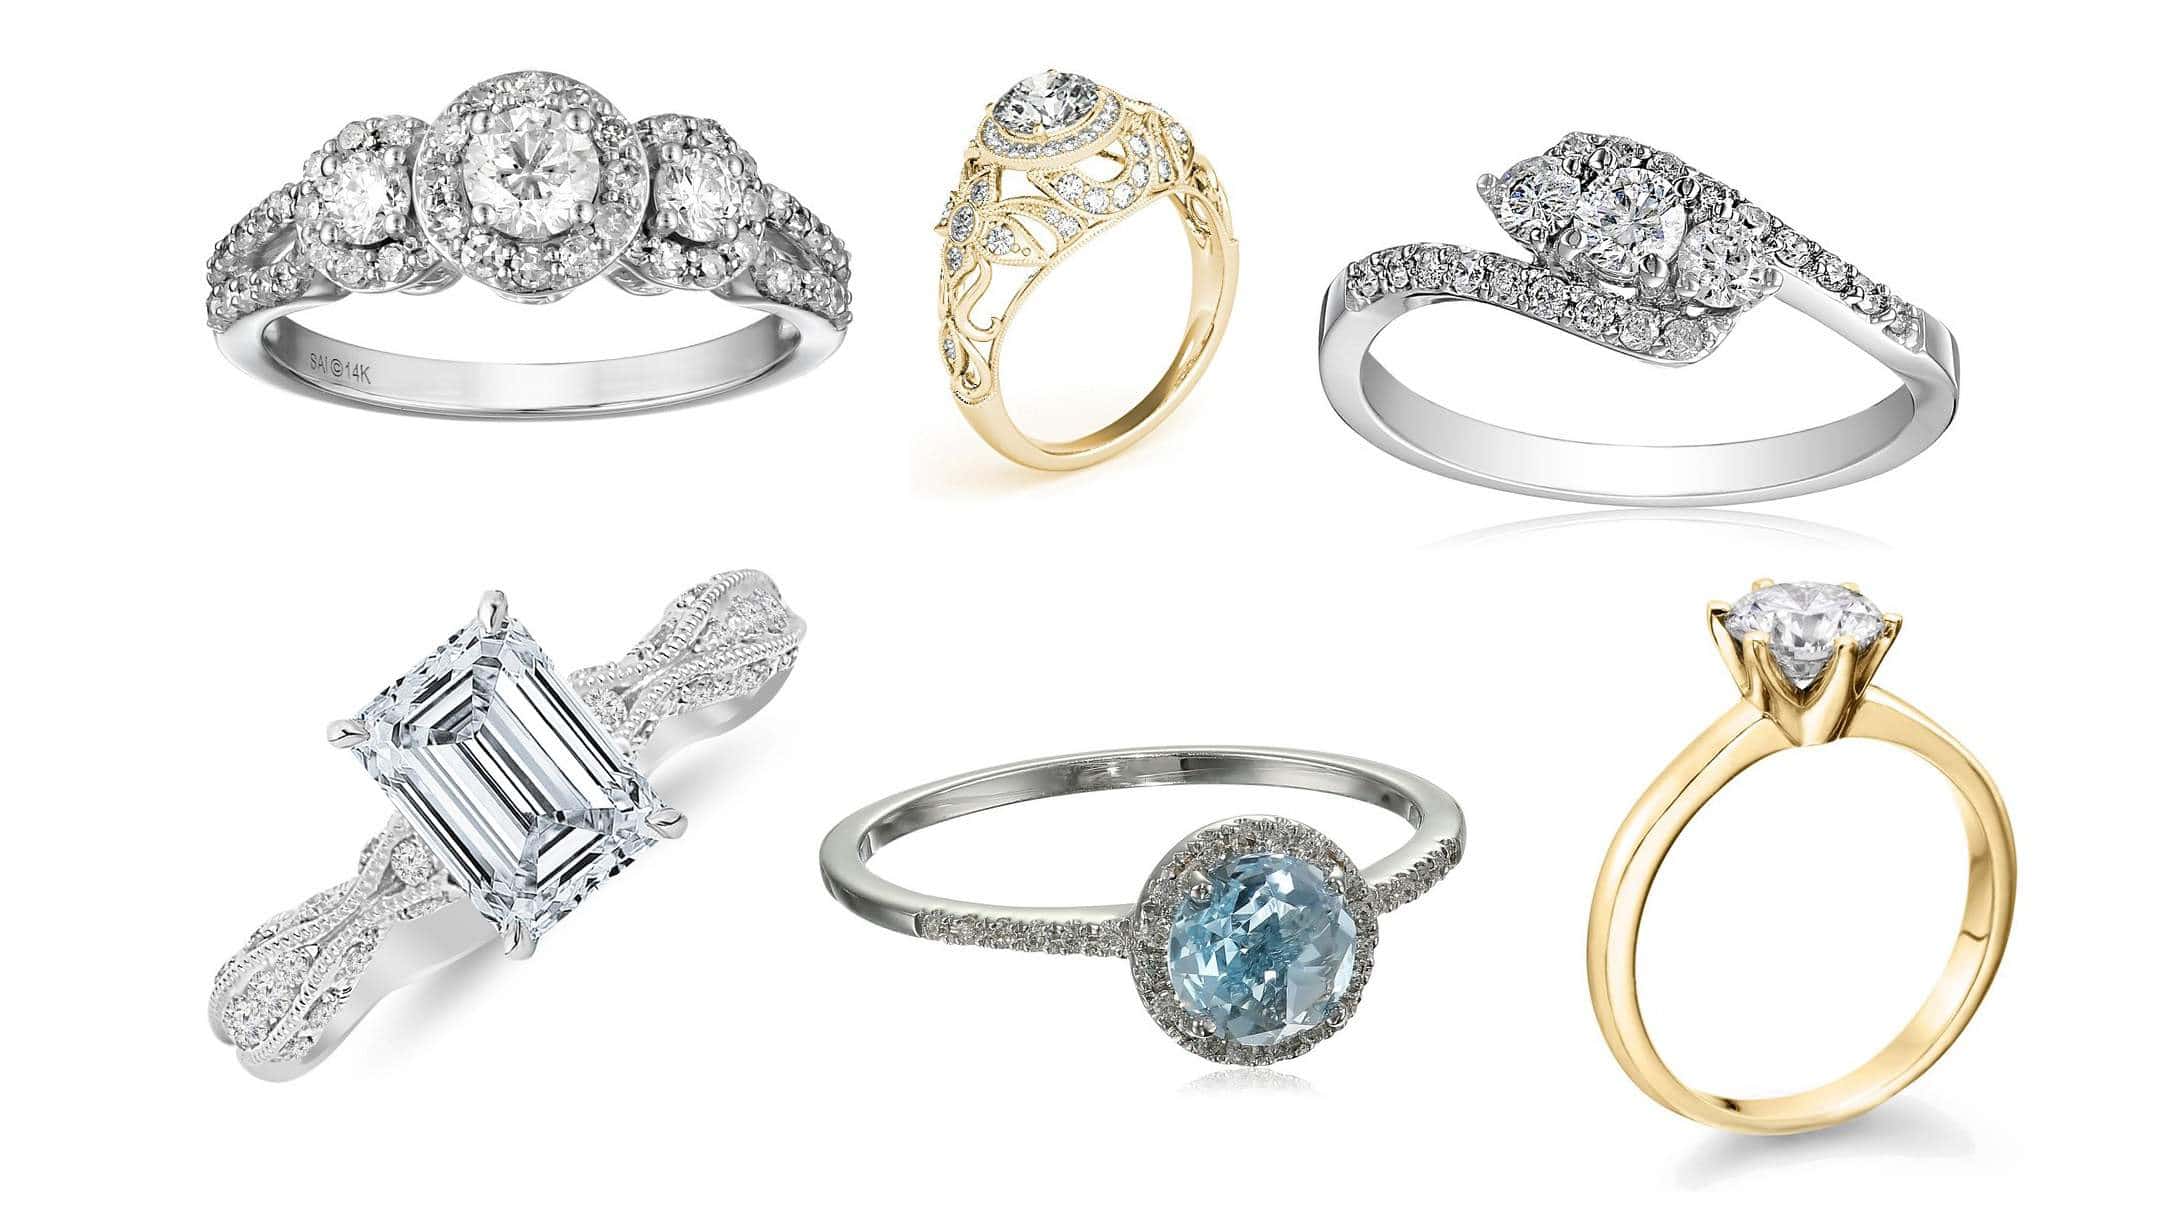 Factors to Consider Before Choosing an Engagement Ring